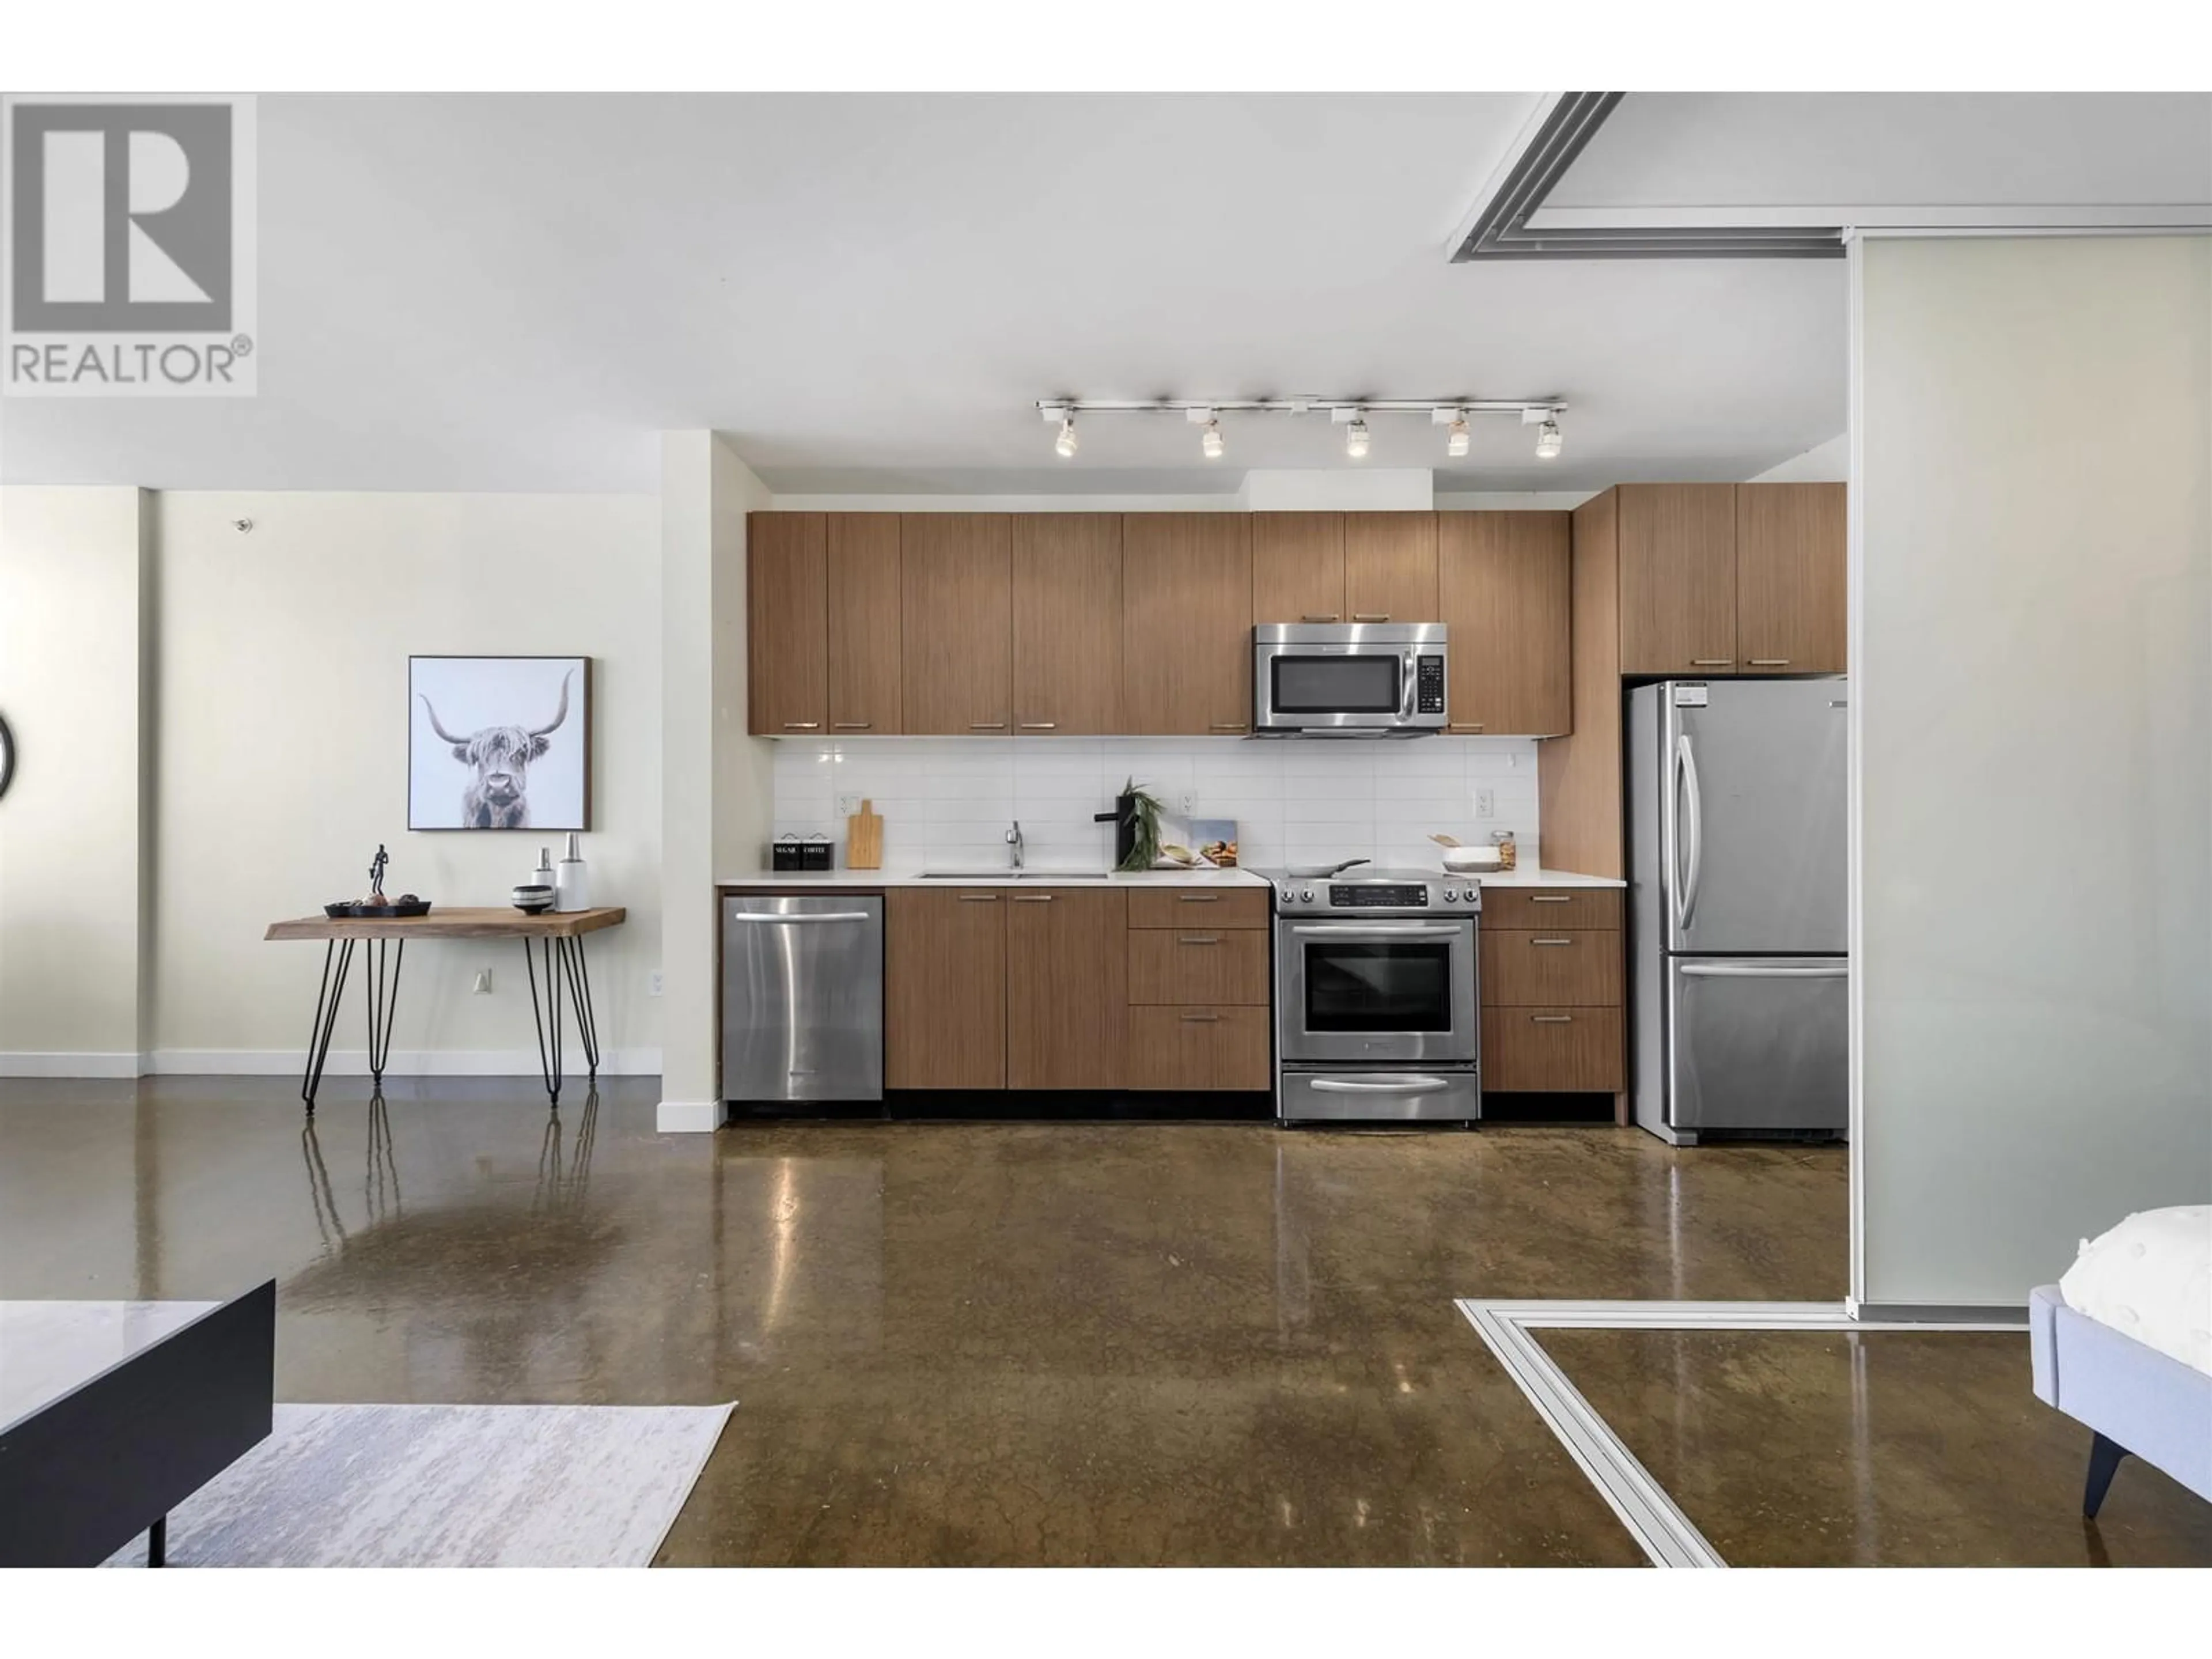 Standard kitchen for 611 221 UNION STREET, Vancouver British Columbia V6A0B4